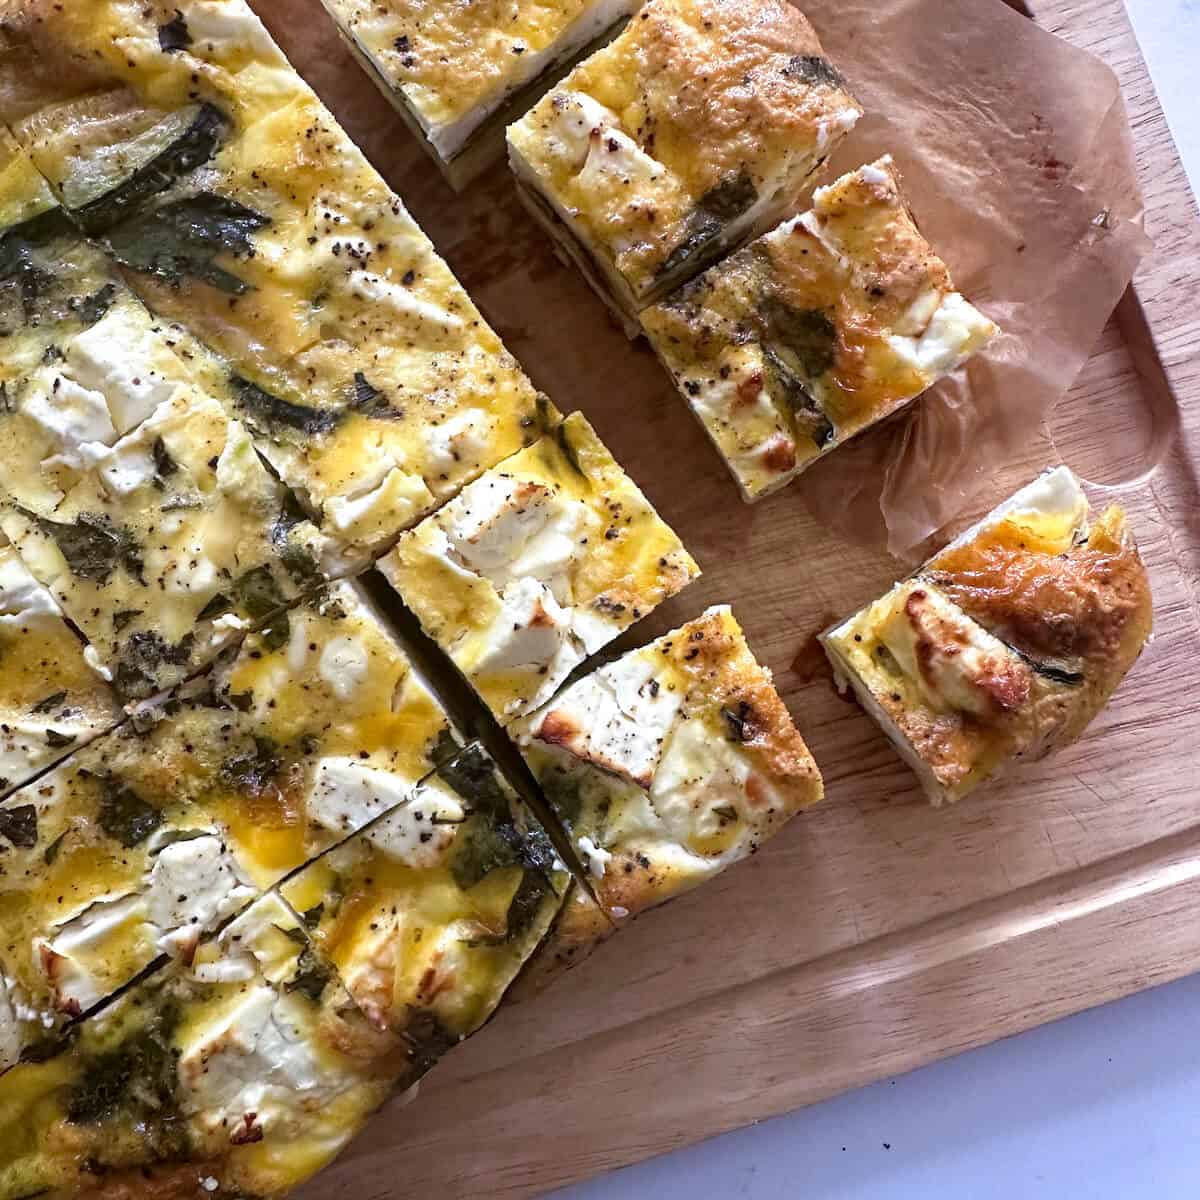 A wooden serving board with a baked frittata on it cut into small squares.